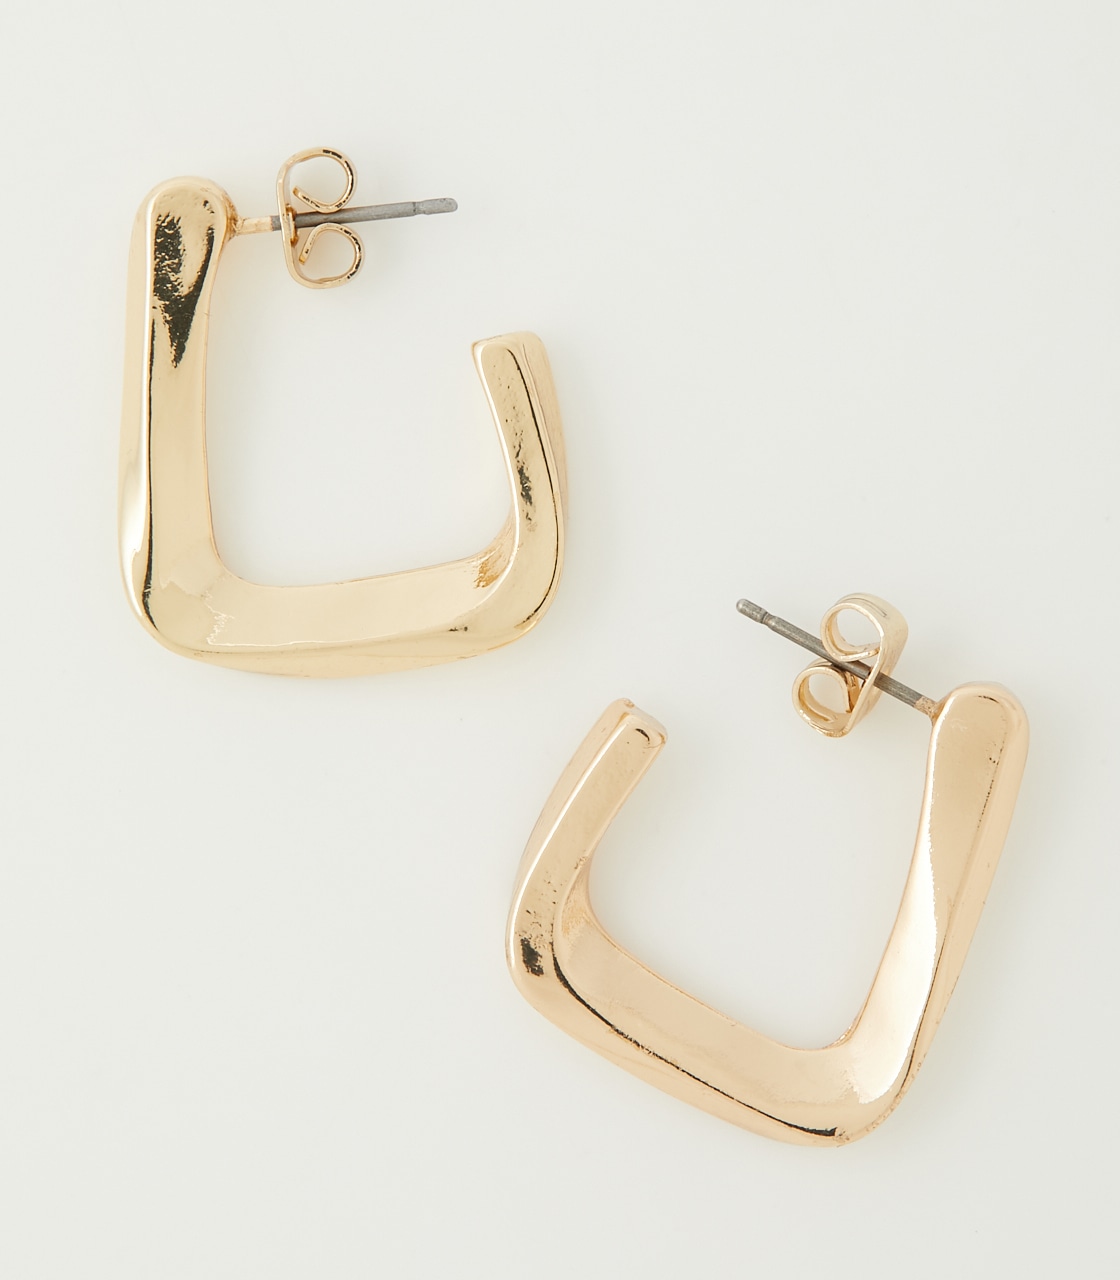 SQUARE METAL EARRINGS/スクエアメタルピアス 詳細画像 L/GLD 2